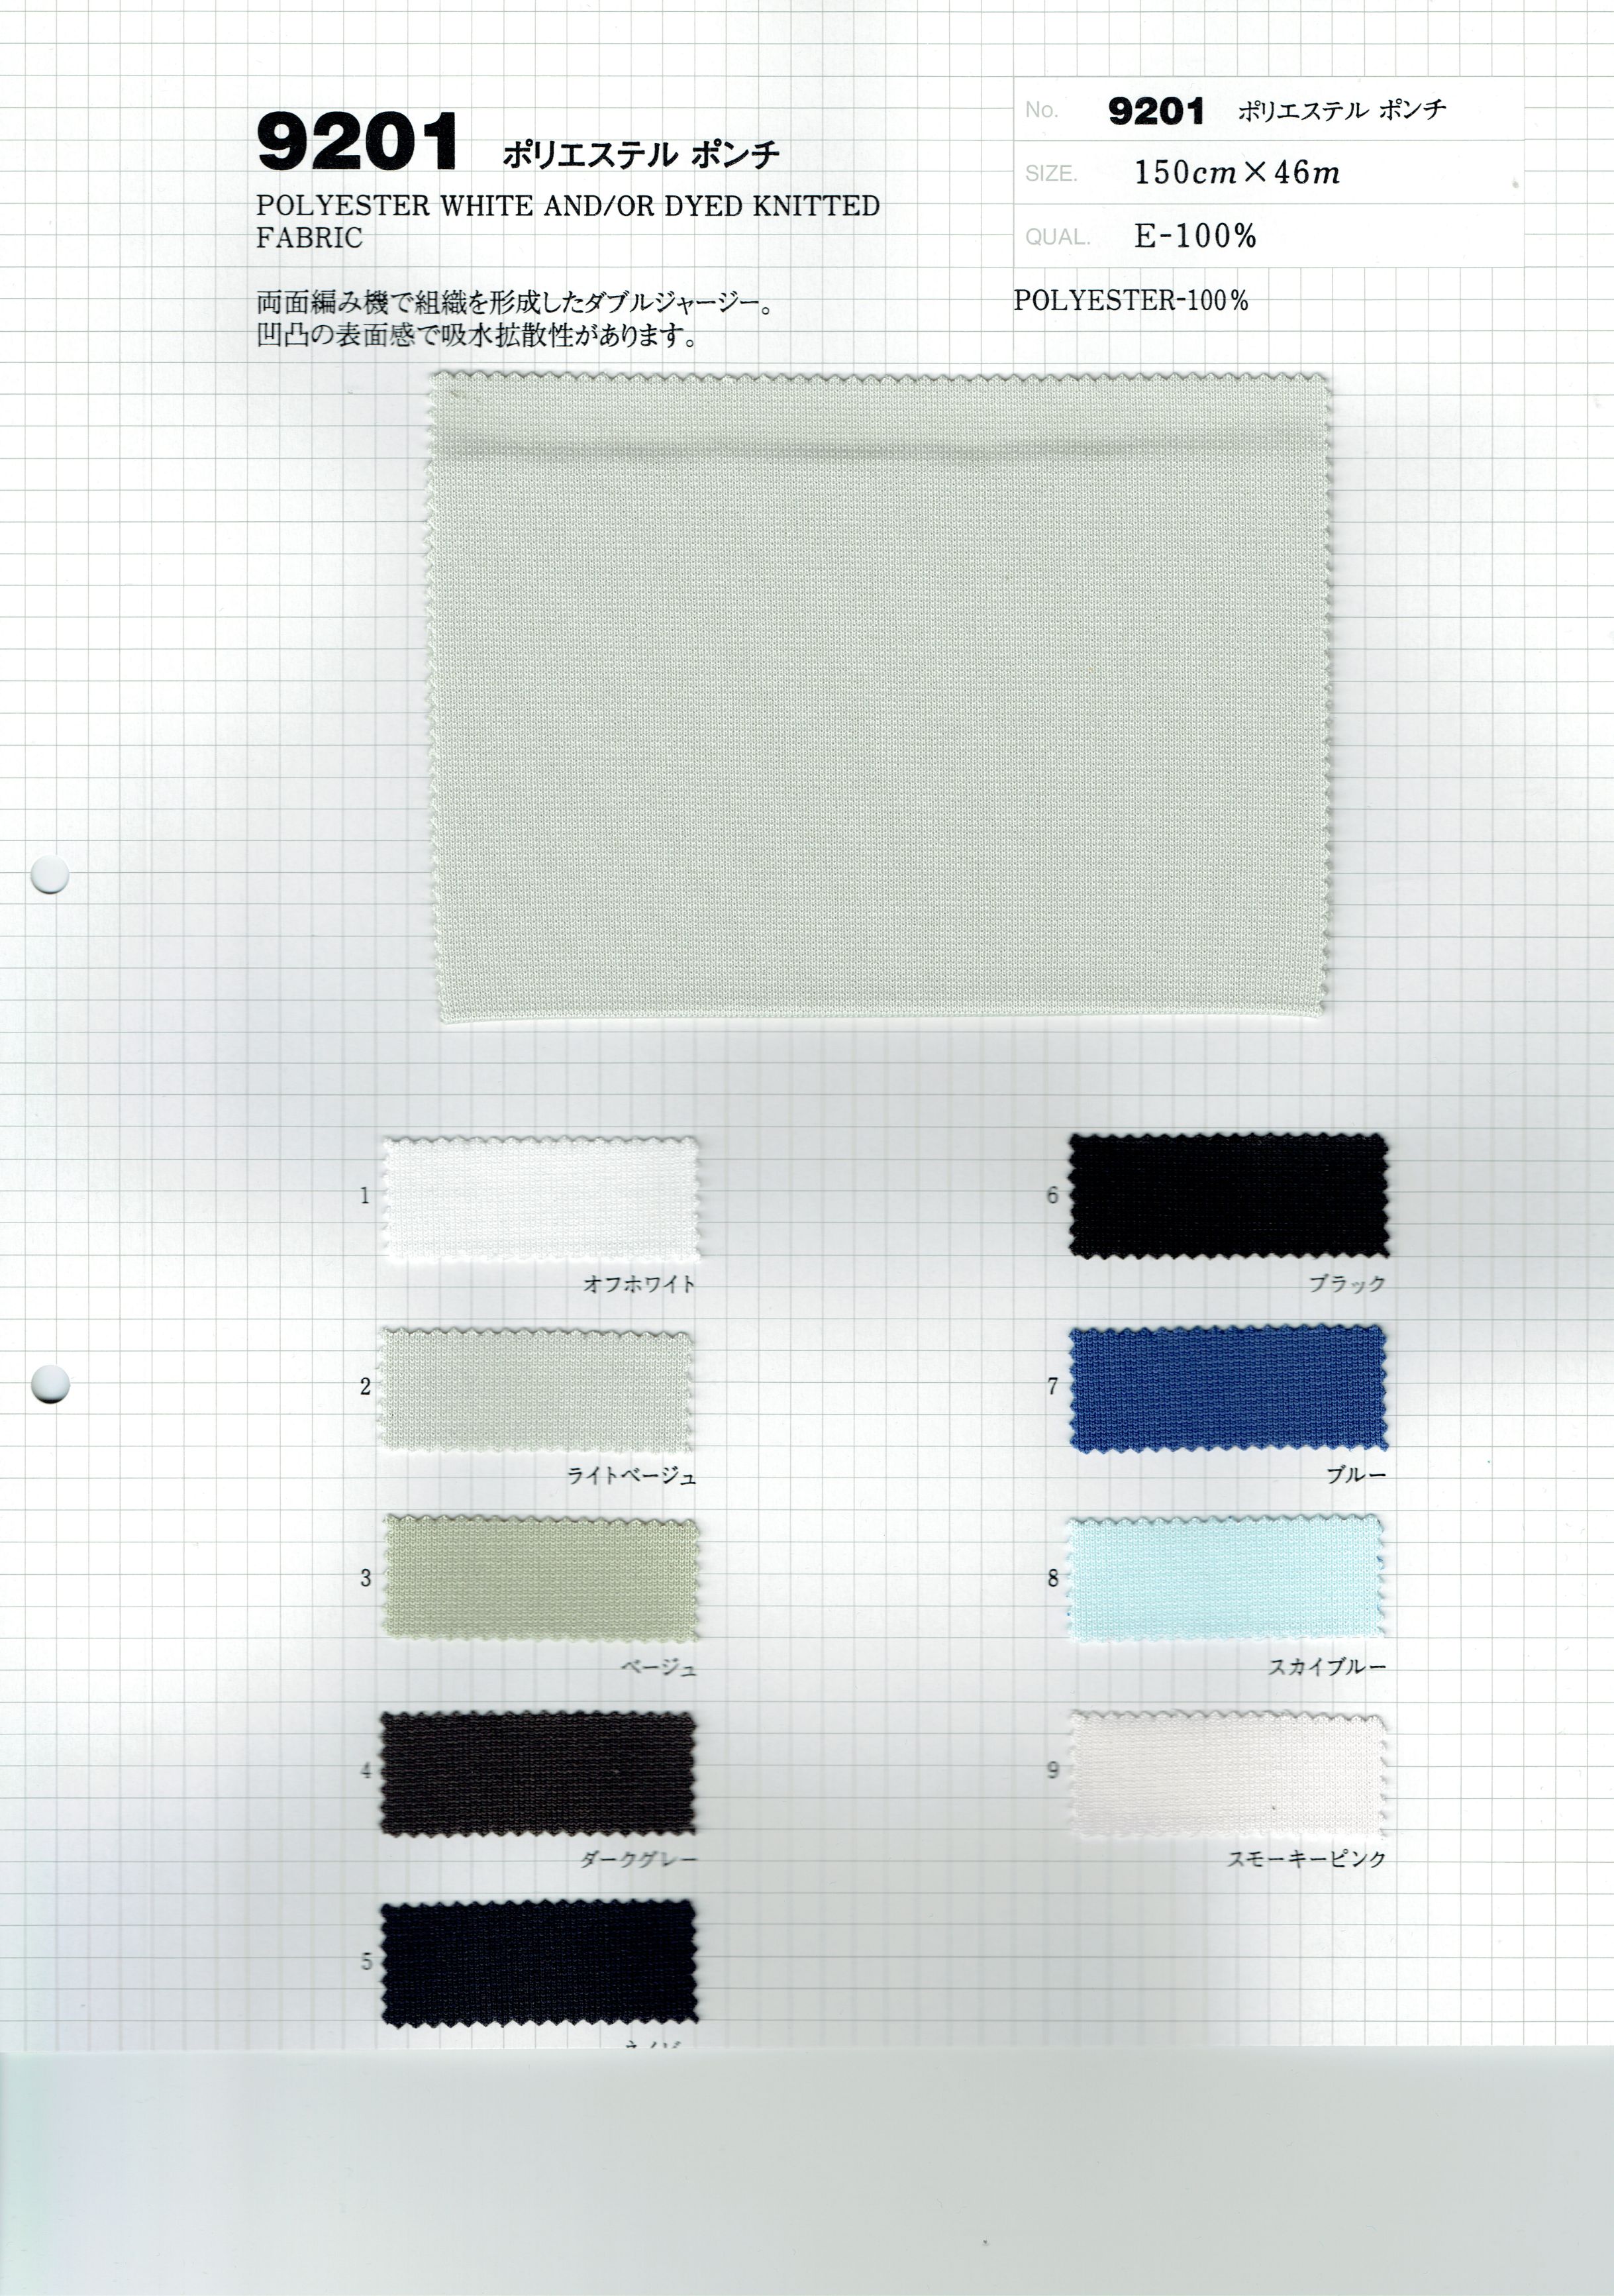 View 100% POLYESTER WHITE AND/OR DYED KNITTED FABRIC